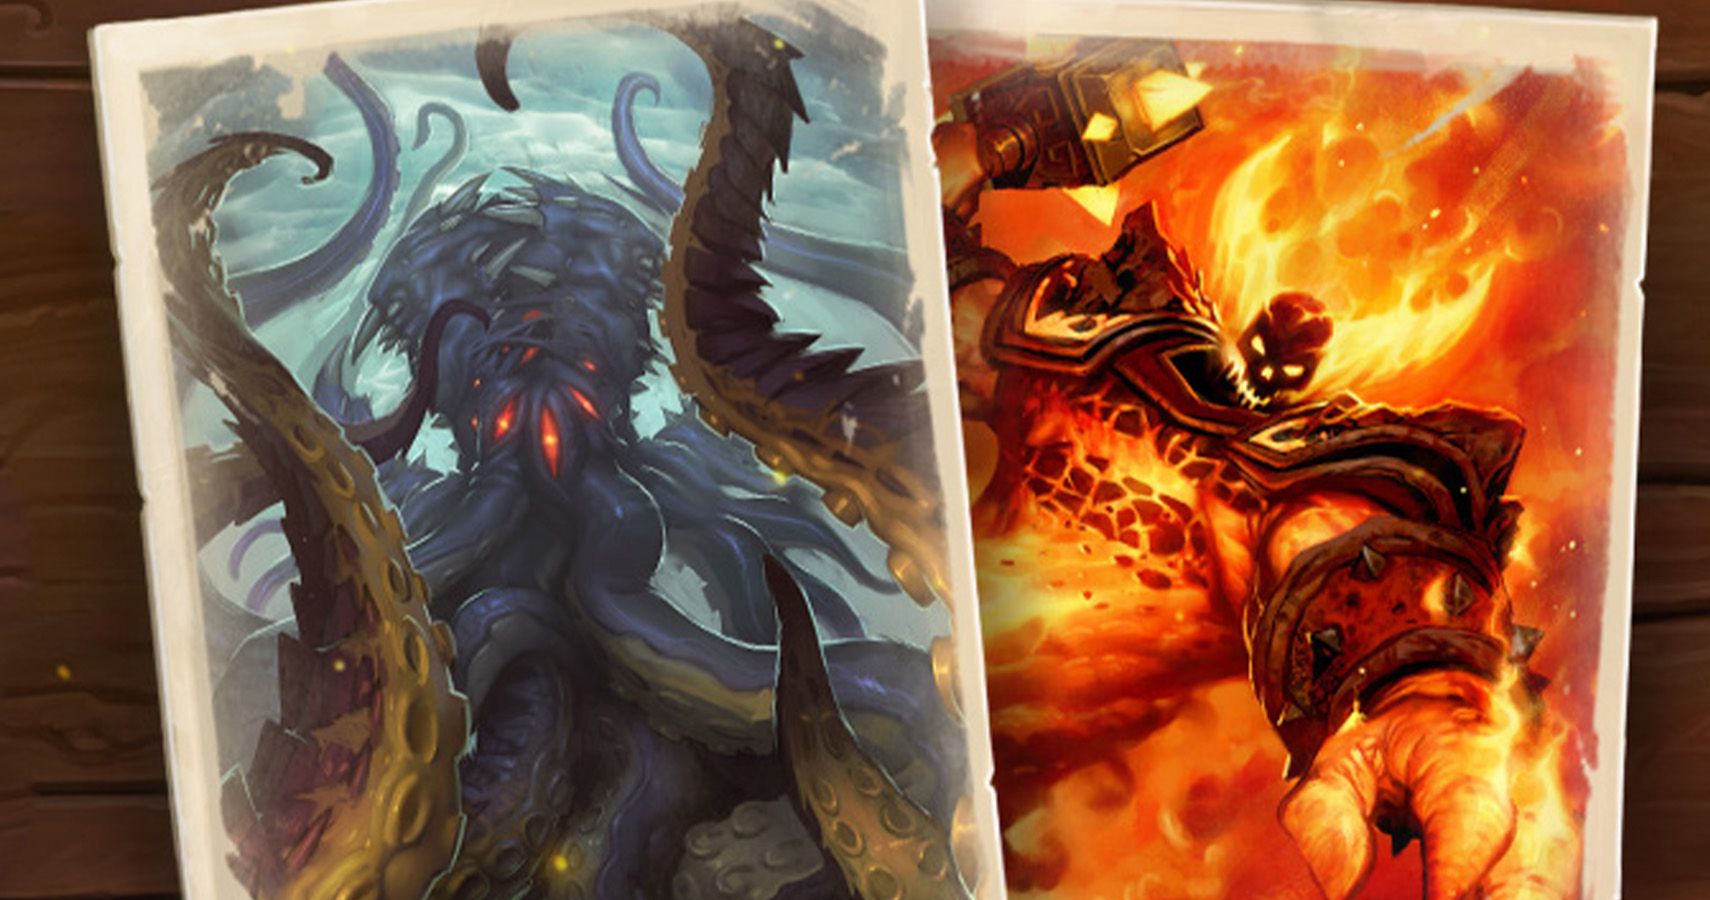 Hearthstone Grandmasters Tour Concludes With New Standard Cards Making Big Waves